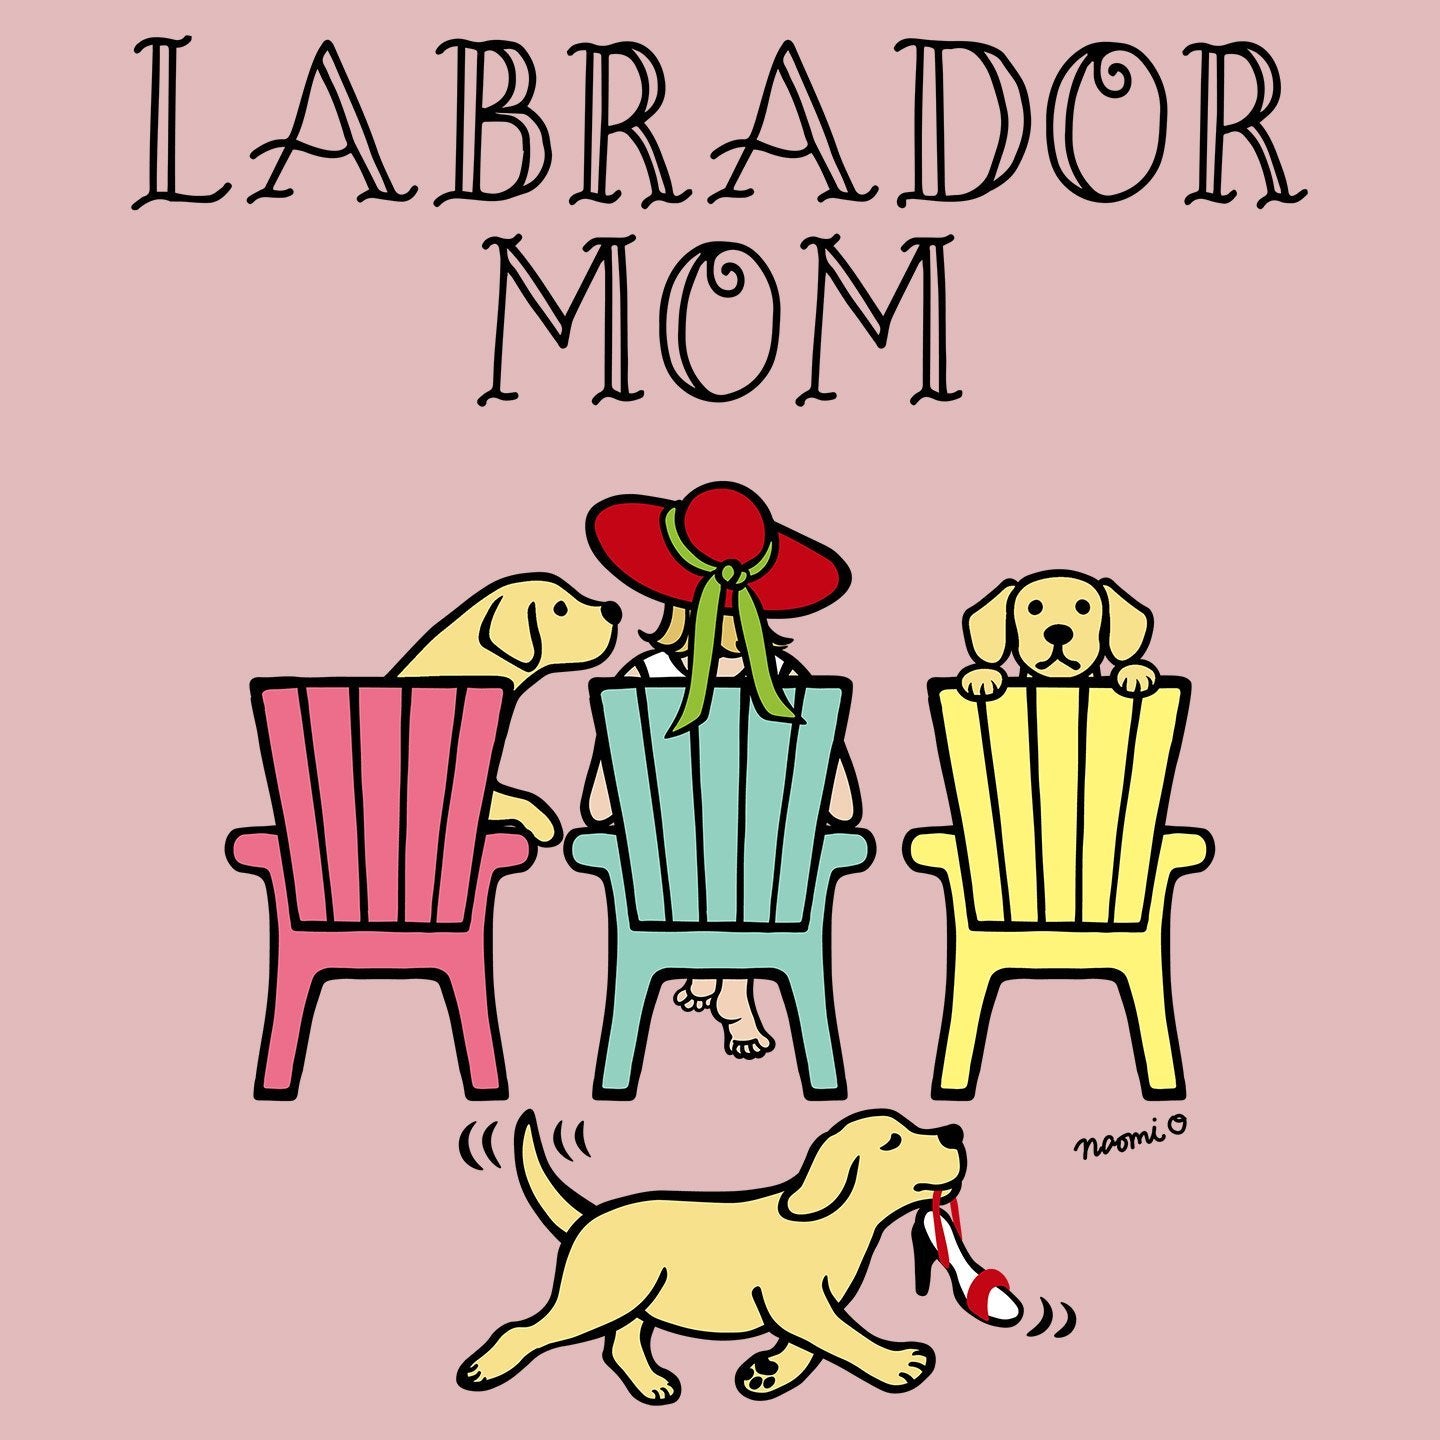 Yellow Labrador Dog Mom - Deck Chairs Design - Women's Fitted T-Shirt